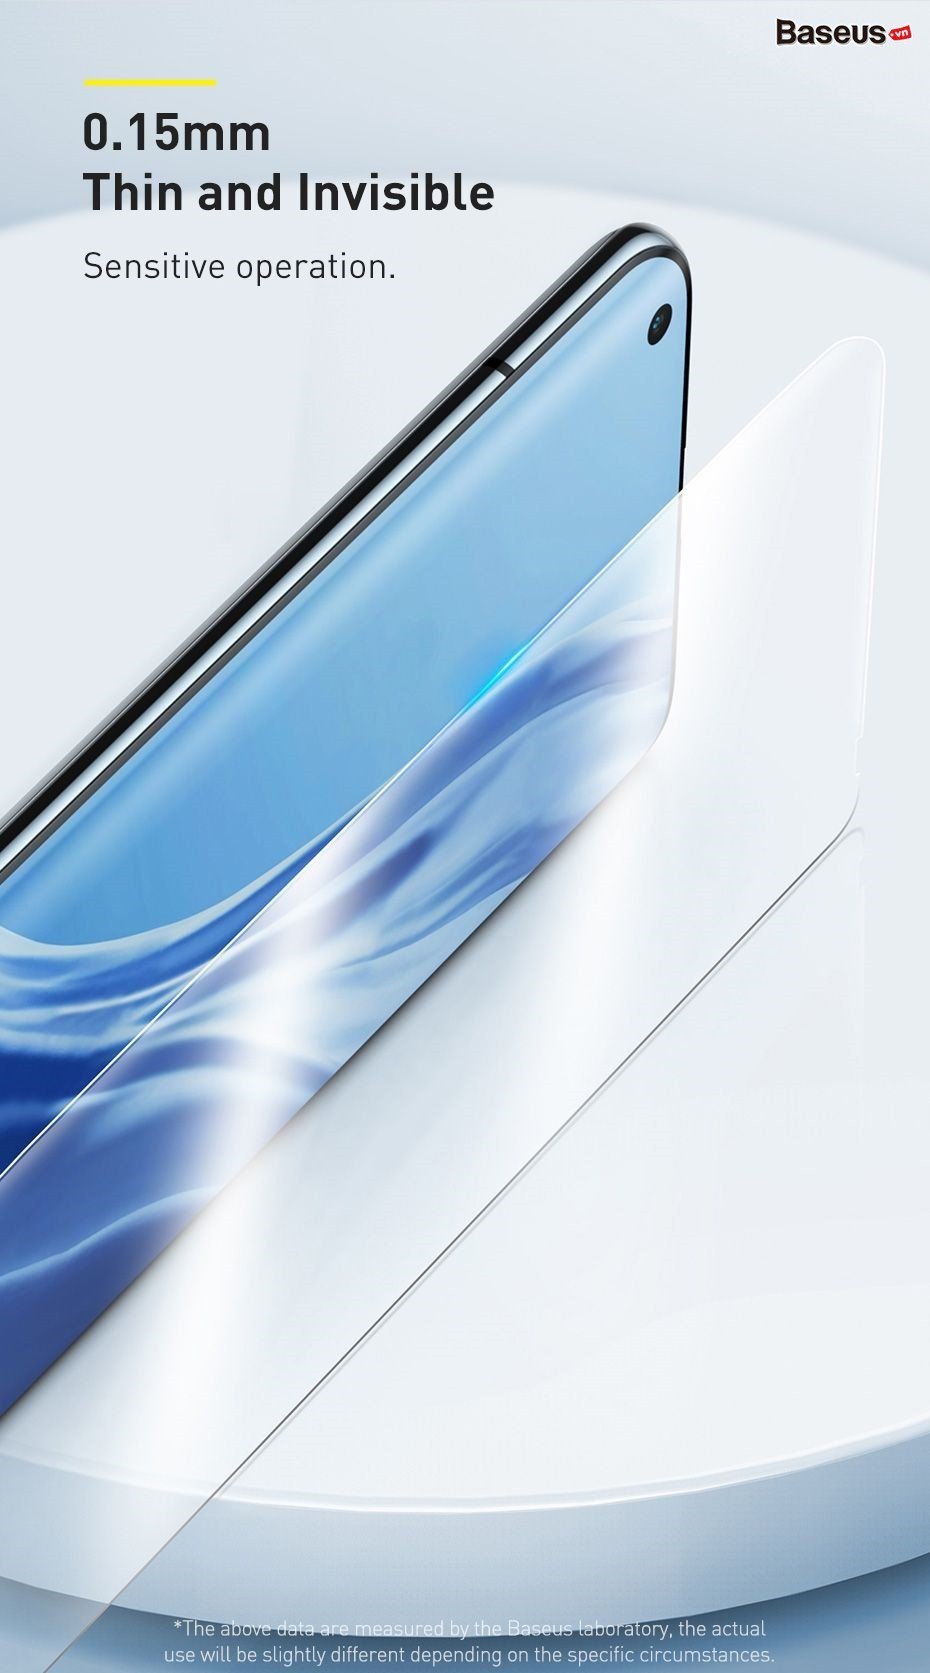 ll-screen_curved_surface_water_gel_protector_for_mi1111_pro_images__07_25370926fbdb4895b3d91f10a751746c.jpg